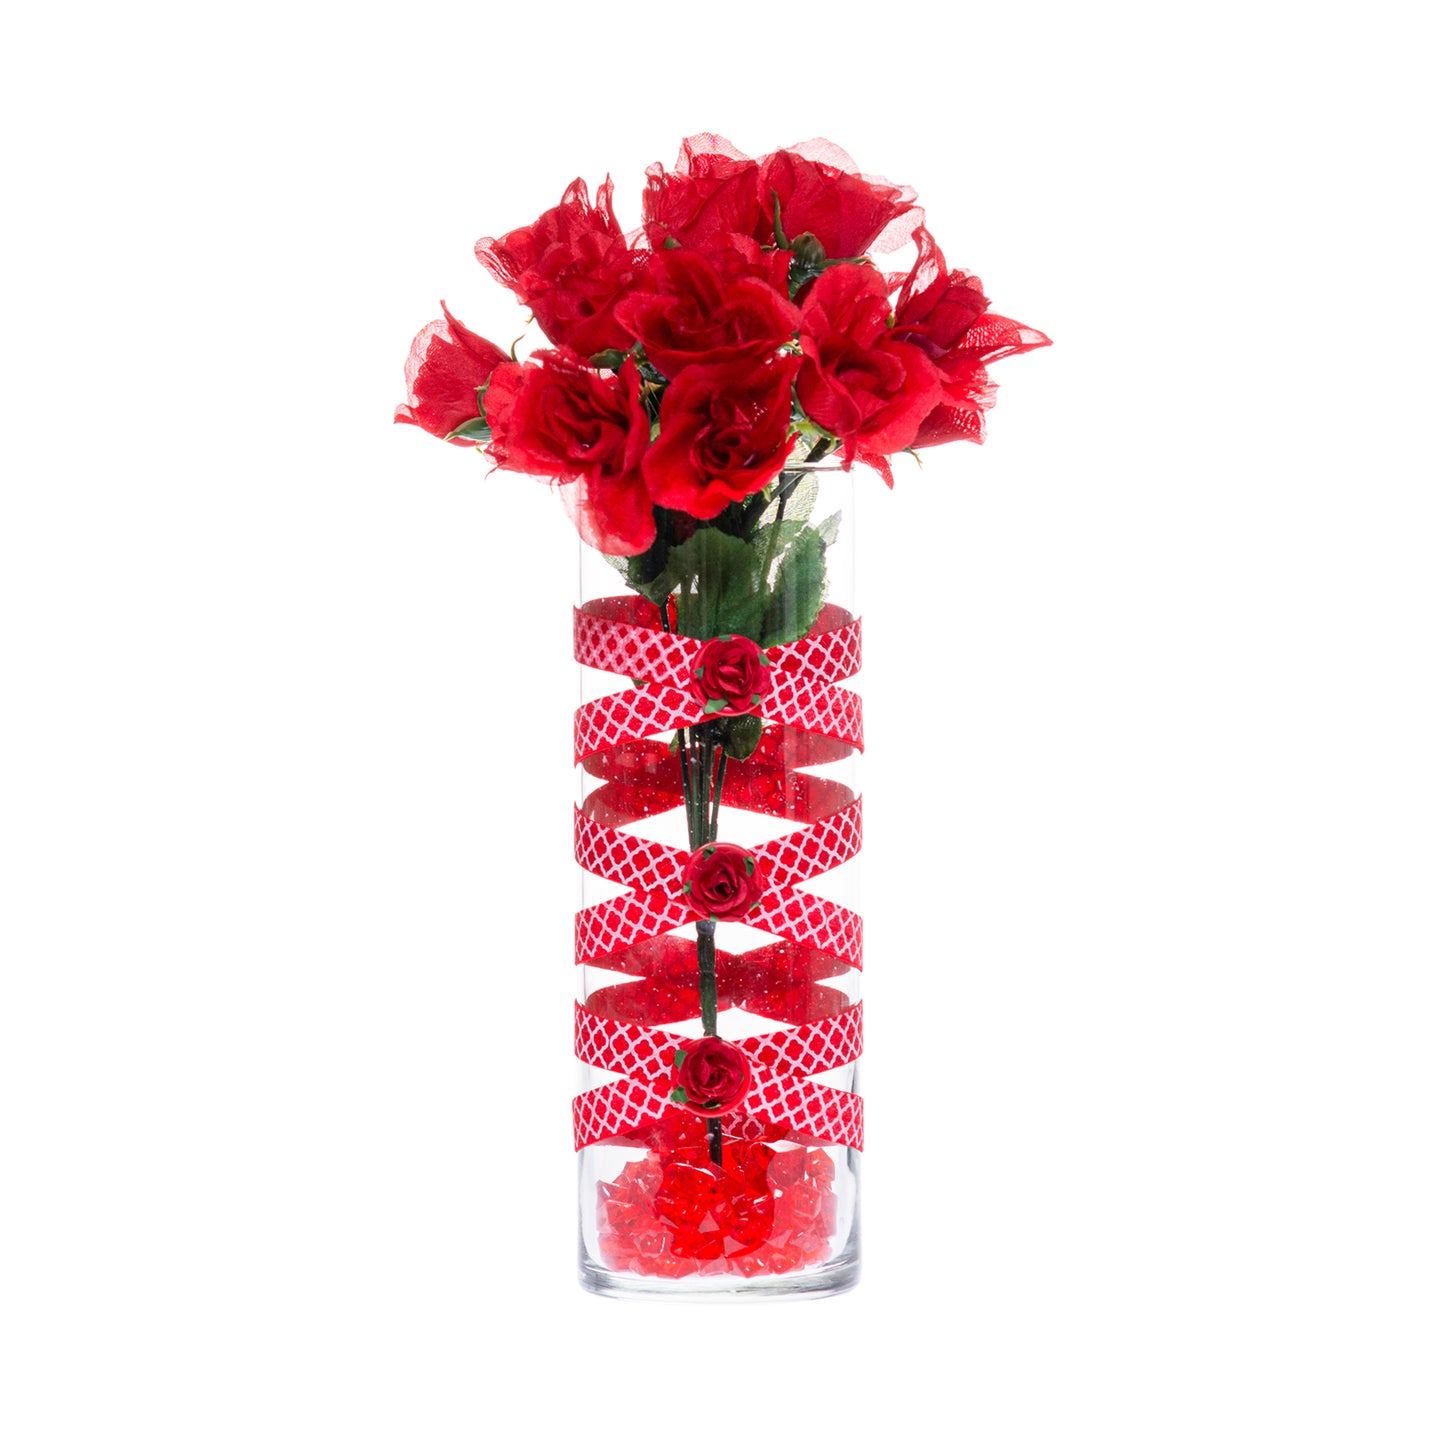 Front of Glass Wrappings' 19" bud vase wrapped in red and white quatrefoil elastic, decorated with 3 red mulberry paper roses. It is filled with red roses.